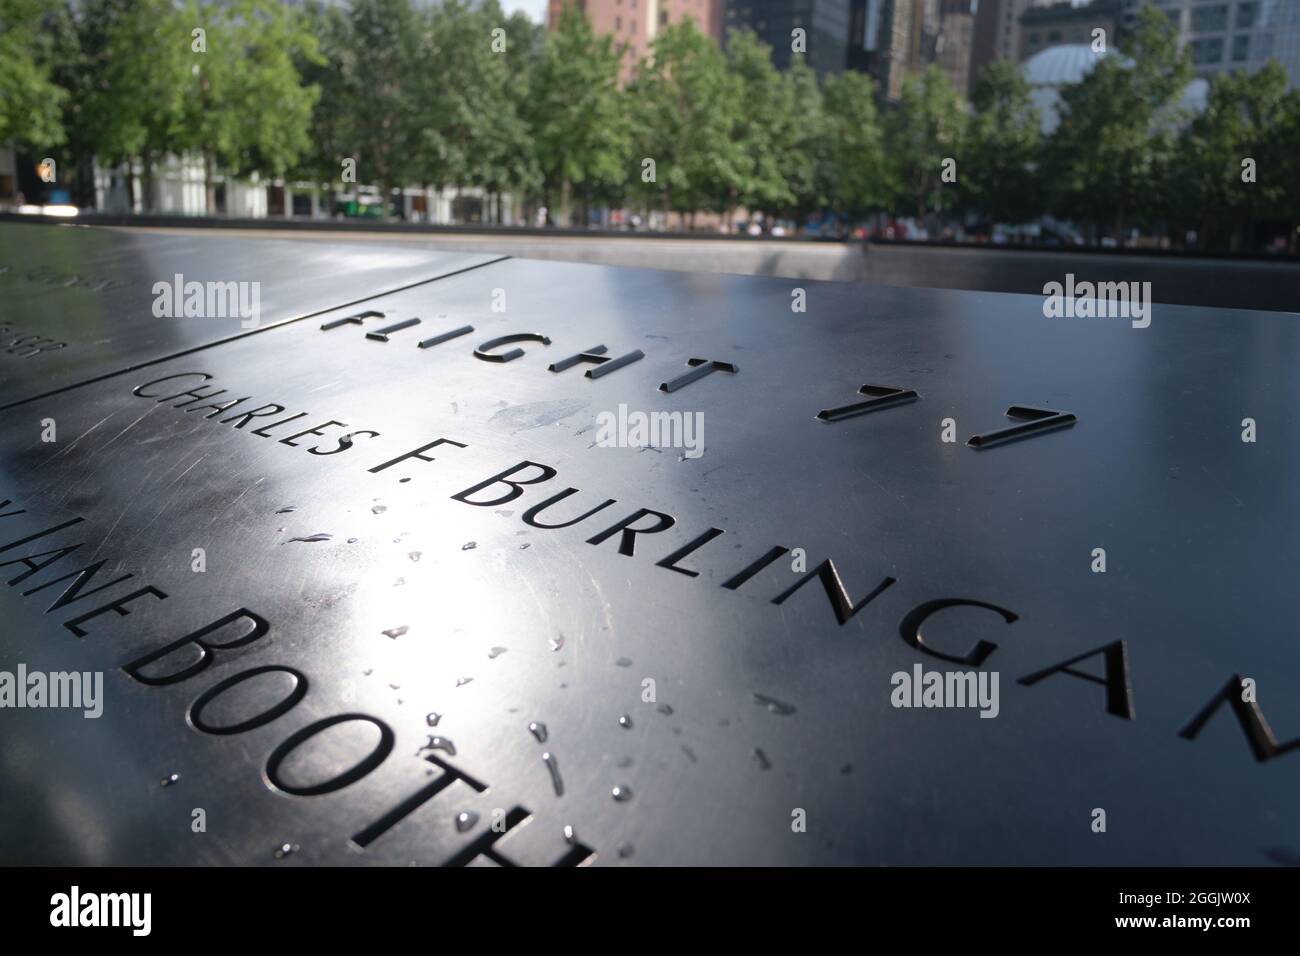 https://c8.alamy.com/comp/2GGJW0X/august-30-2021-brooklyn-new-york-usa-plaque-of-names-that-lines-the-south-pool-at-the-world-trade-center-memorial-site-showing-section-honoring-those-who-died-on-american-airlines-flight-77-on-911-new-york-ny-20210830new-credit-image-edna-leshowitzzuma-press-wire-2GGJW0X.jpg